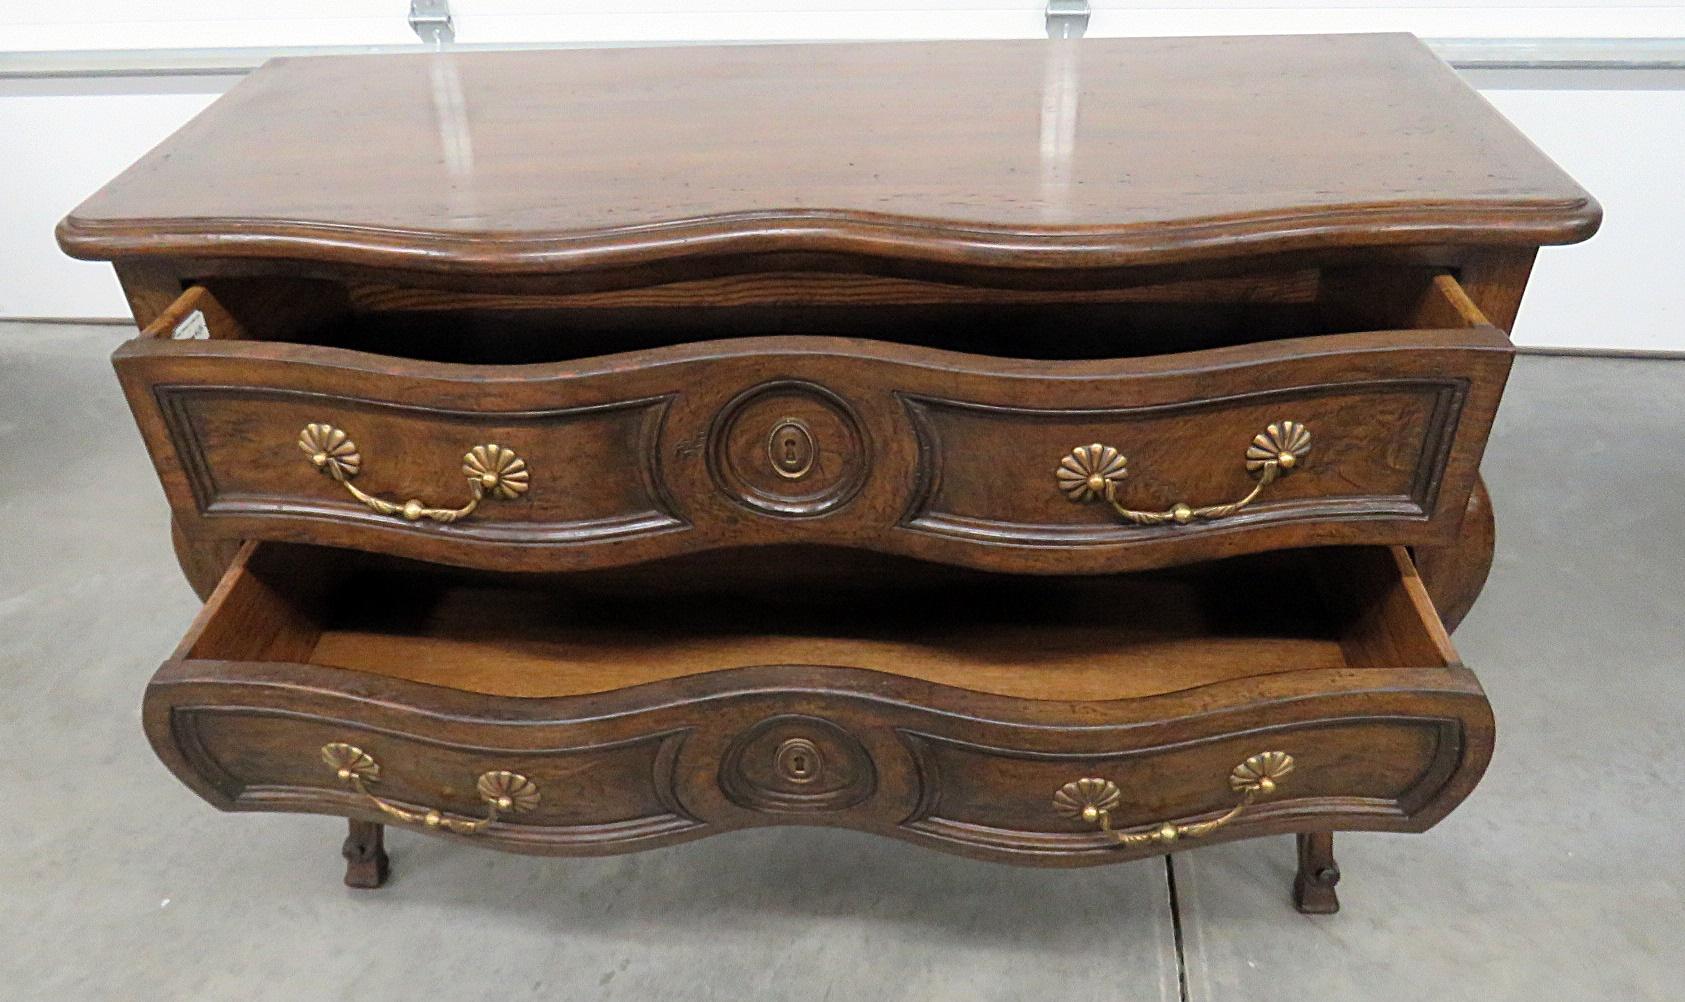 20th Century Pair of Auffray Bombe Commodes